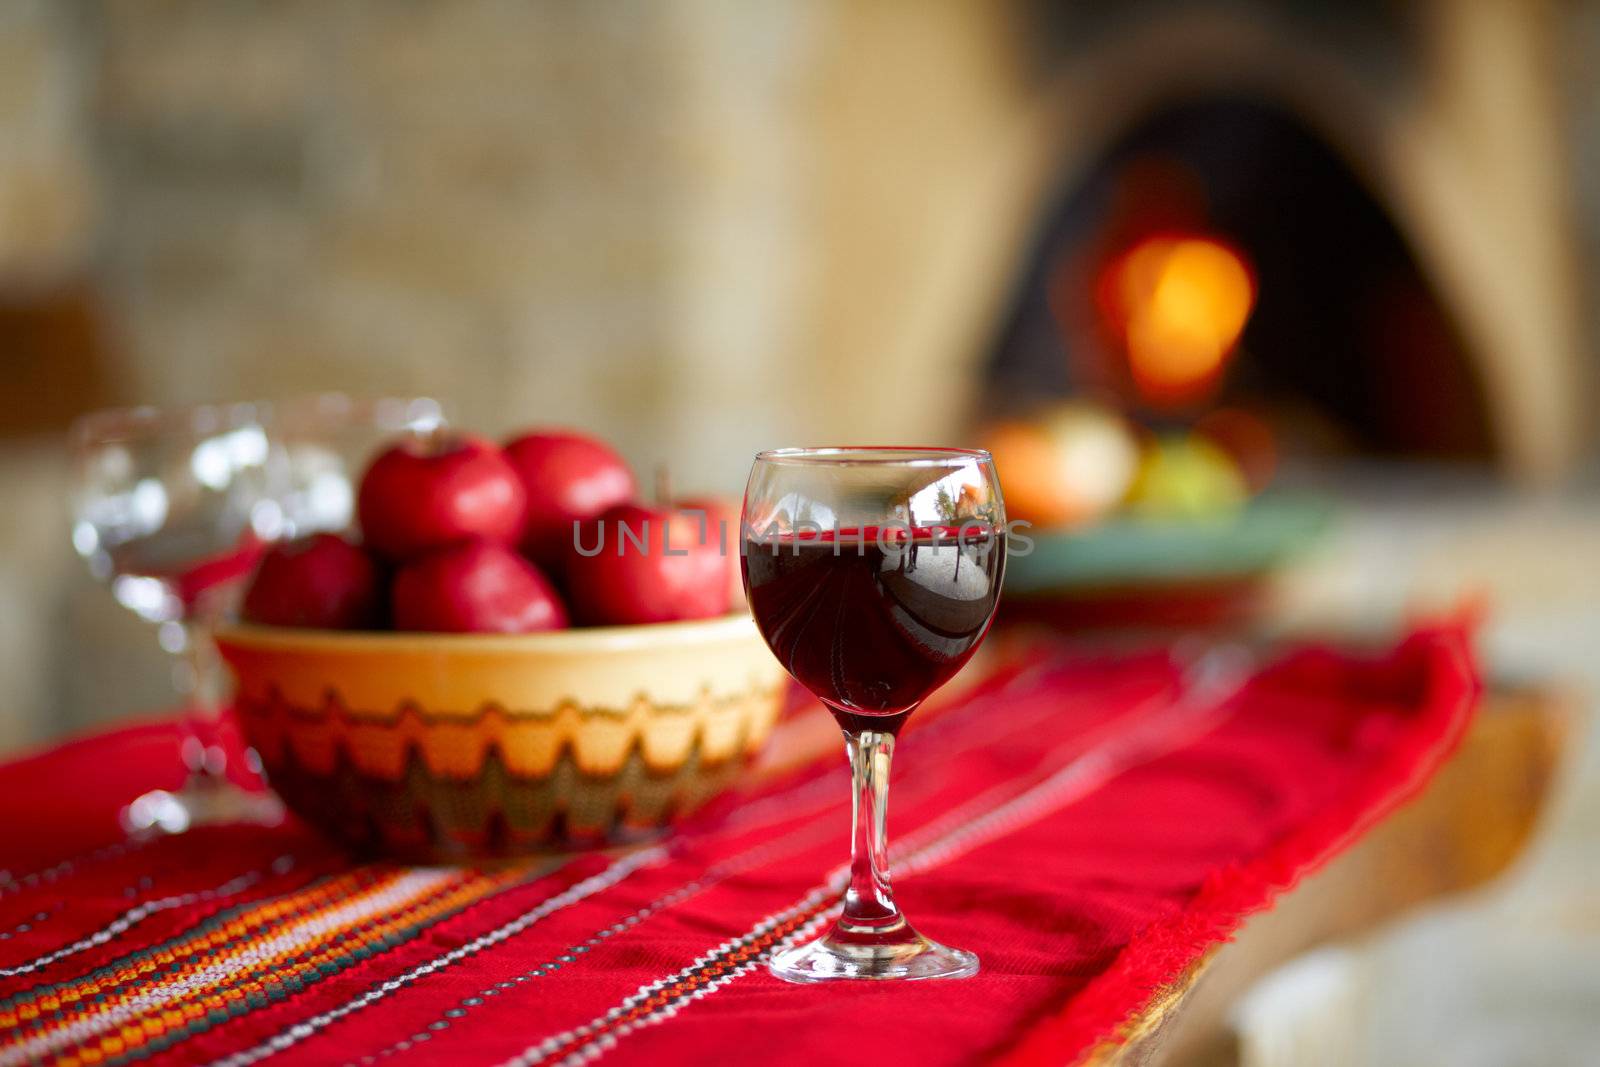 Glass of red wine on a table, behind a fireplace